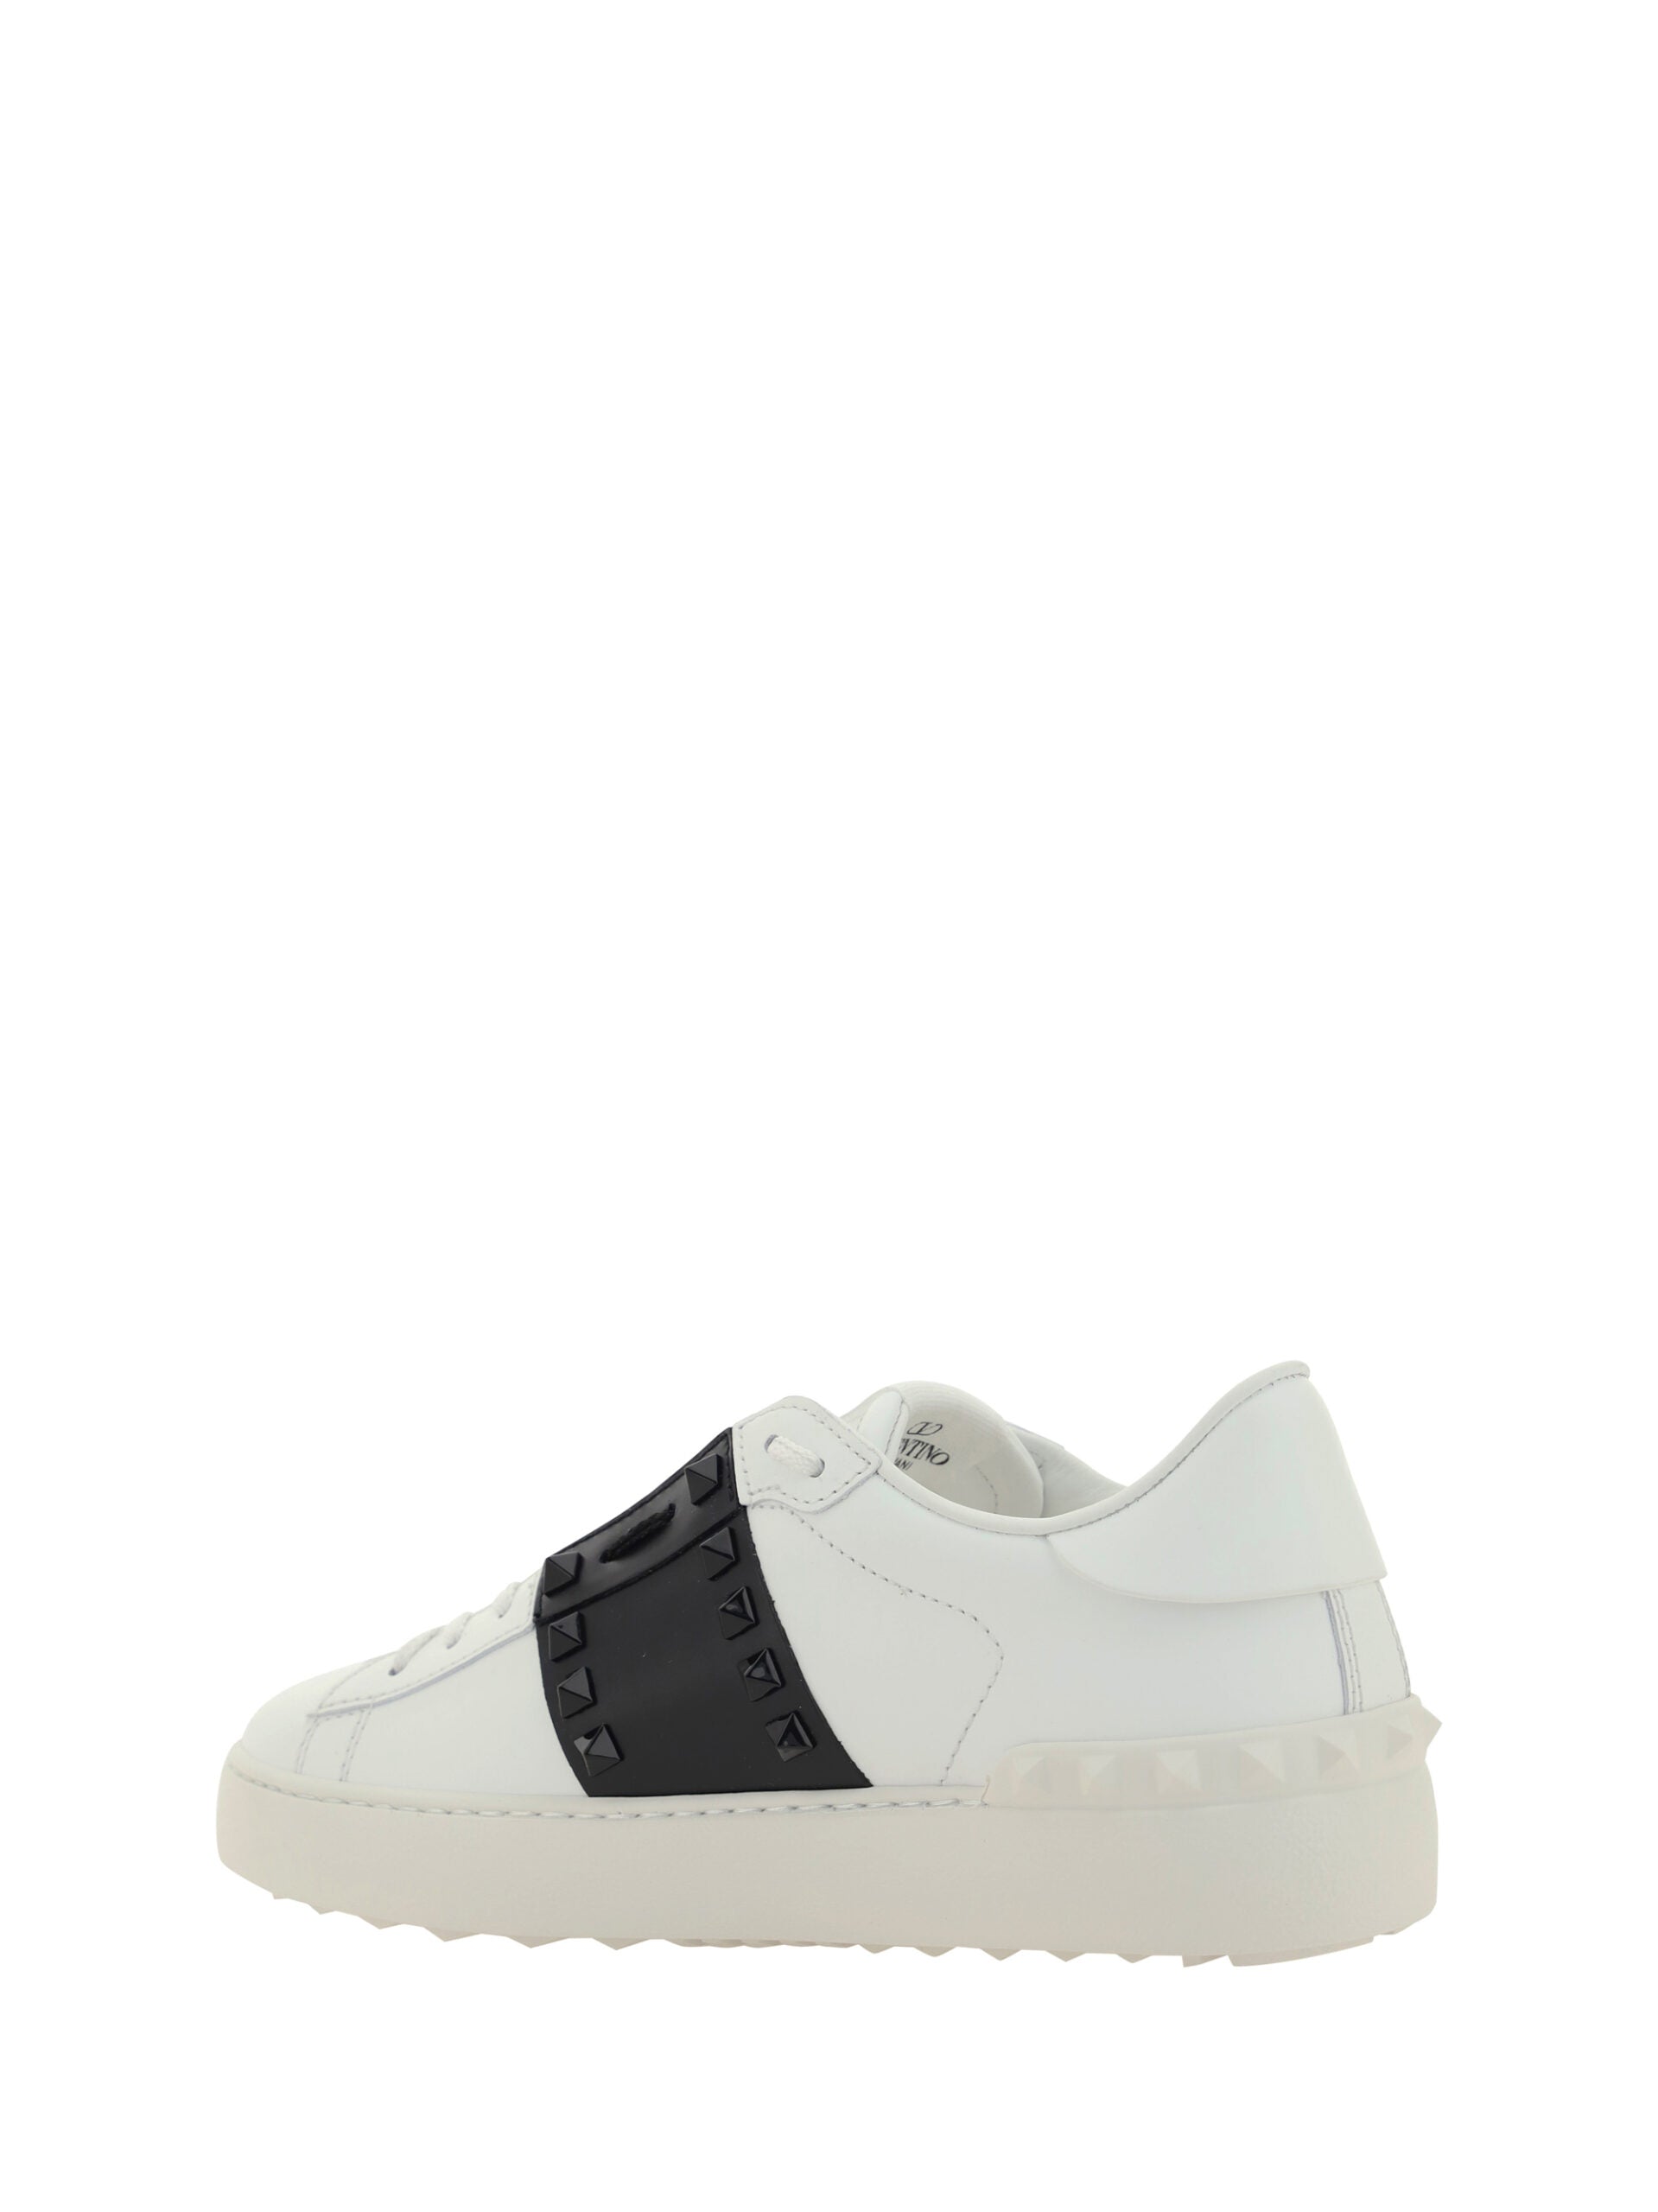 Valentino White and Black Calf Leather Sneakers - clever alice